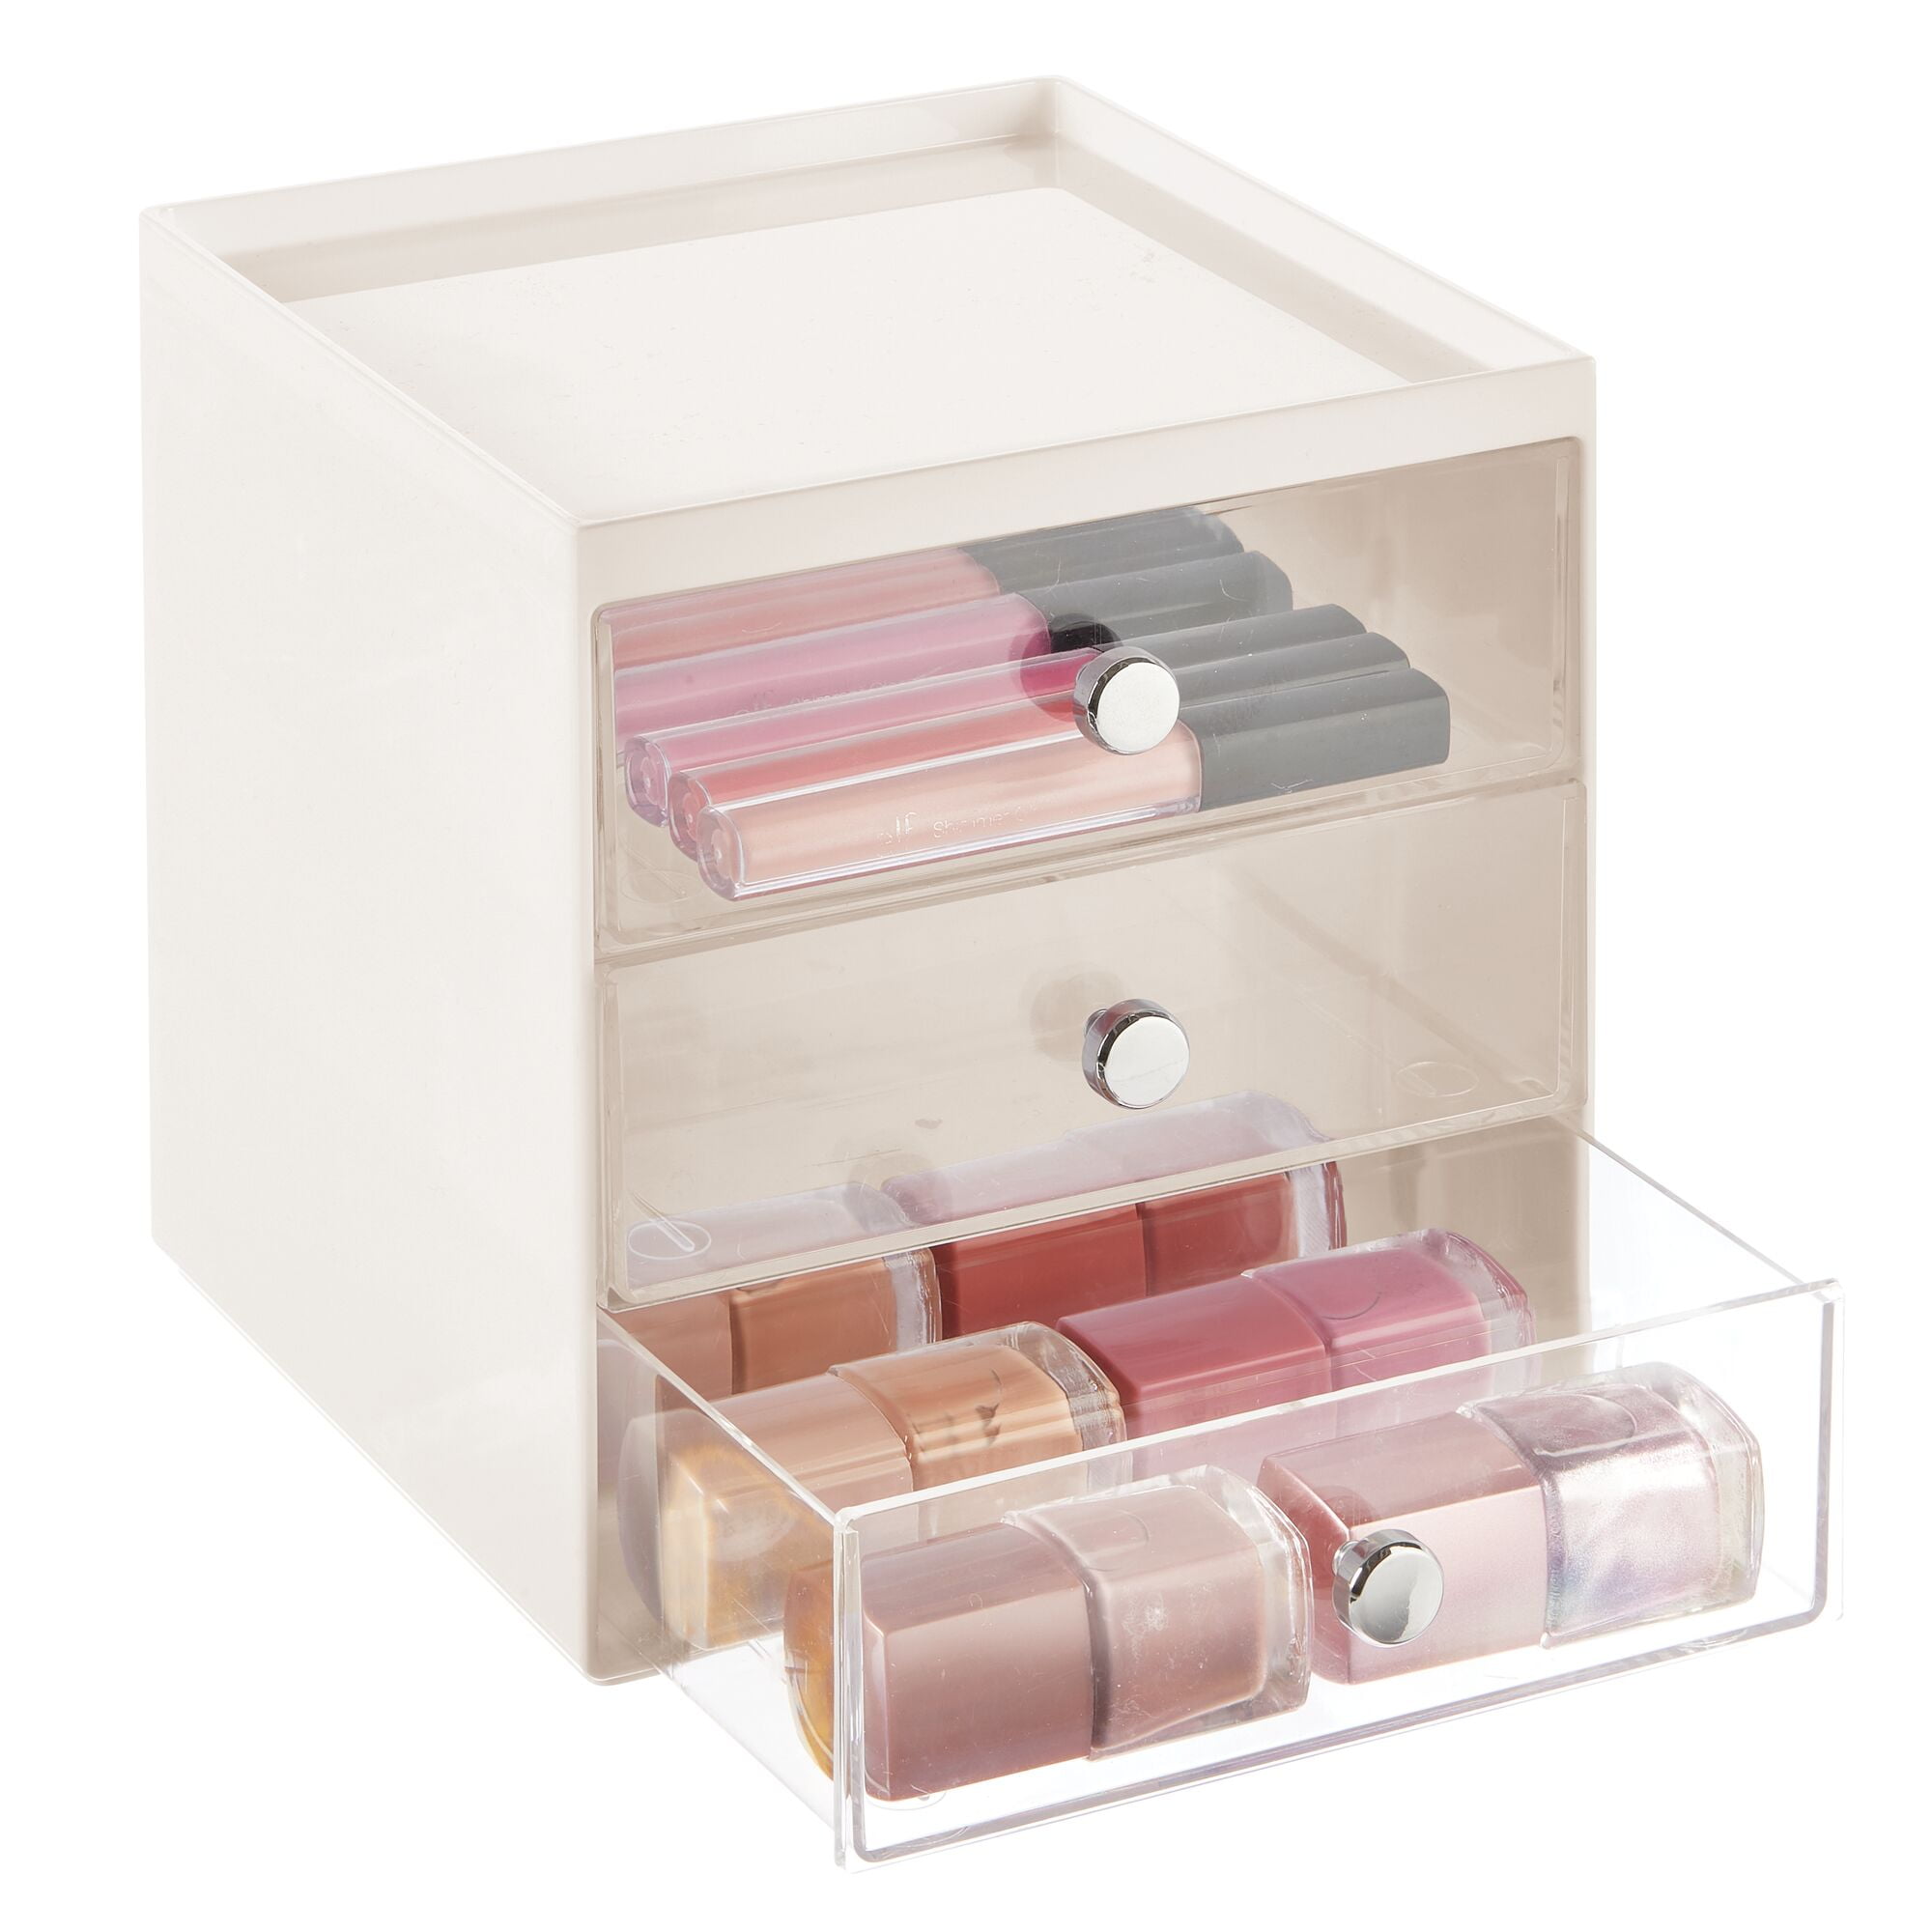 mDesign Plastic Stackable Organizer with 3 Drawers - Pull-Out Drawer  Storage Bin for Bathroom Sink/Cabinet Organization - Perfect for Makeup,  Small